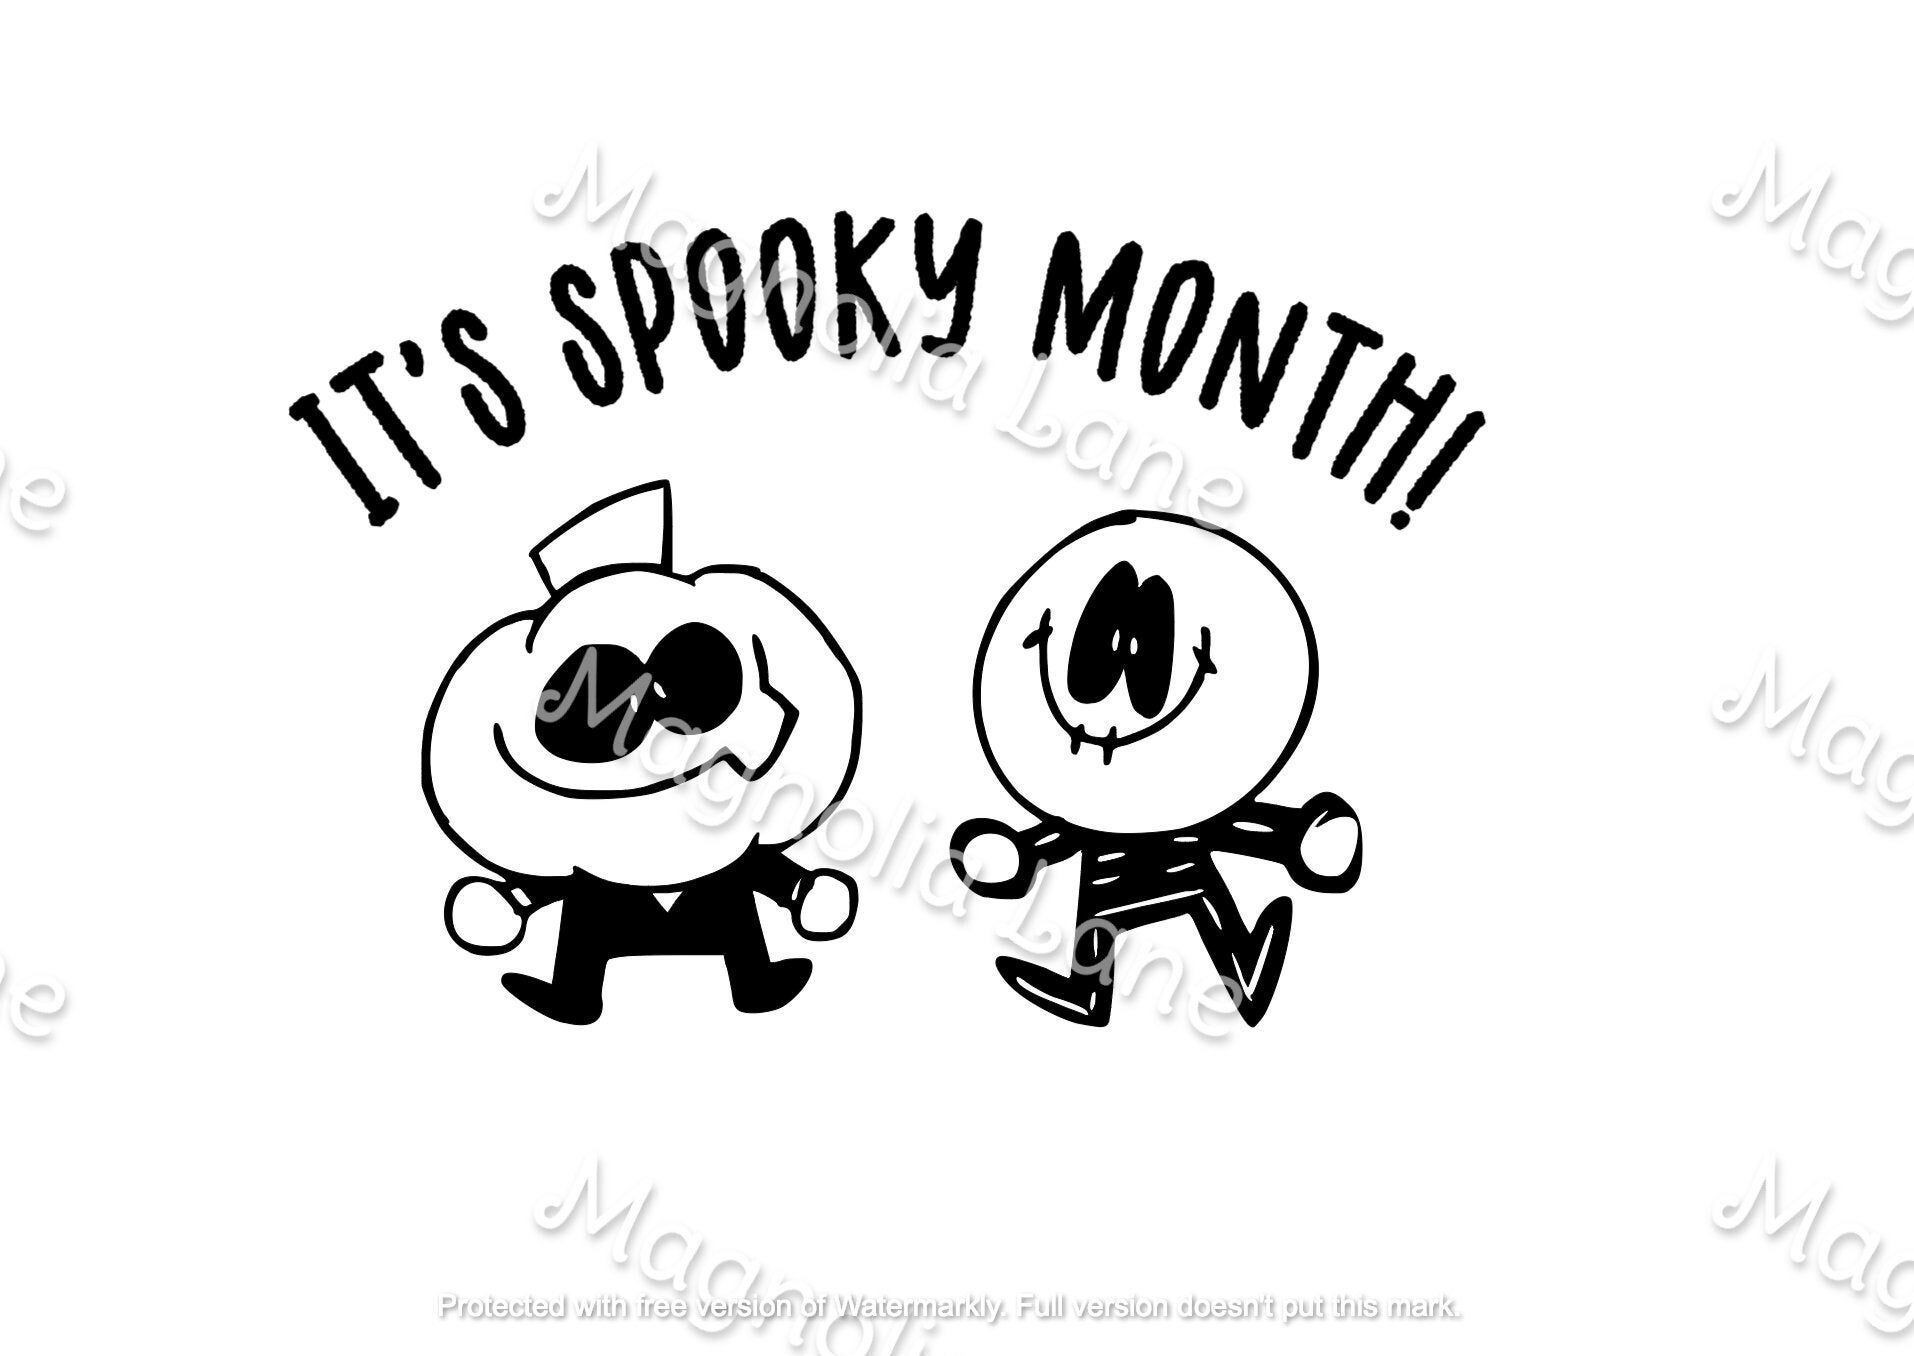 Kevin spooky month 😏 by Emilyville_draws on Sketchers United